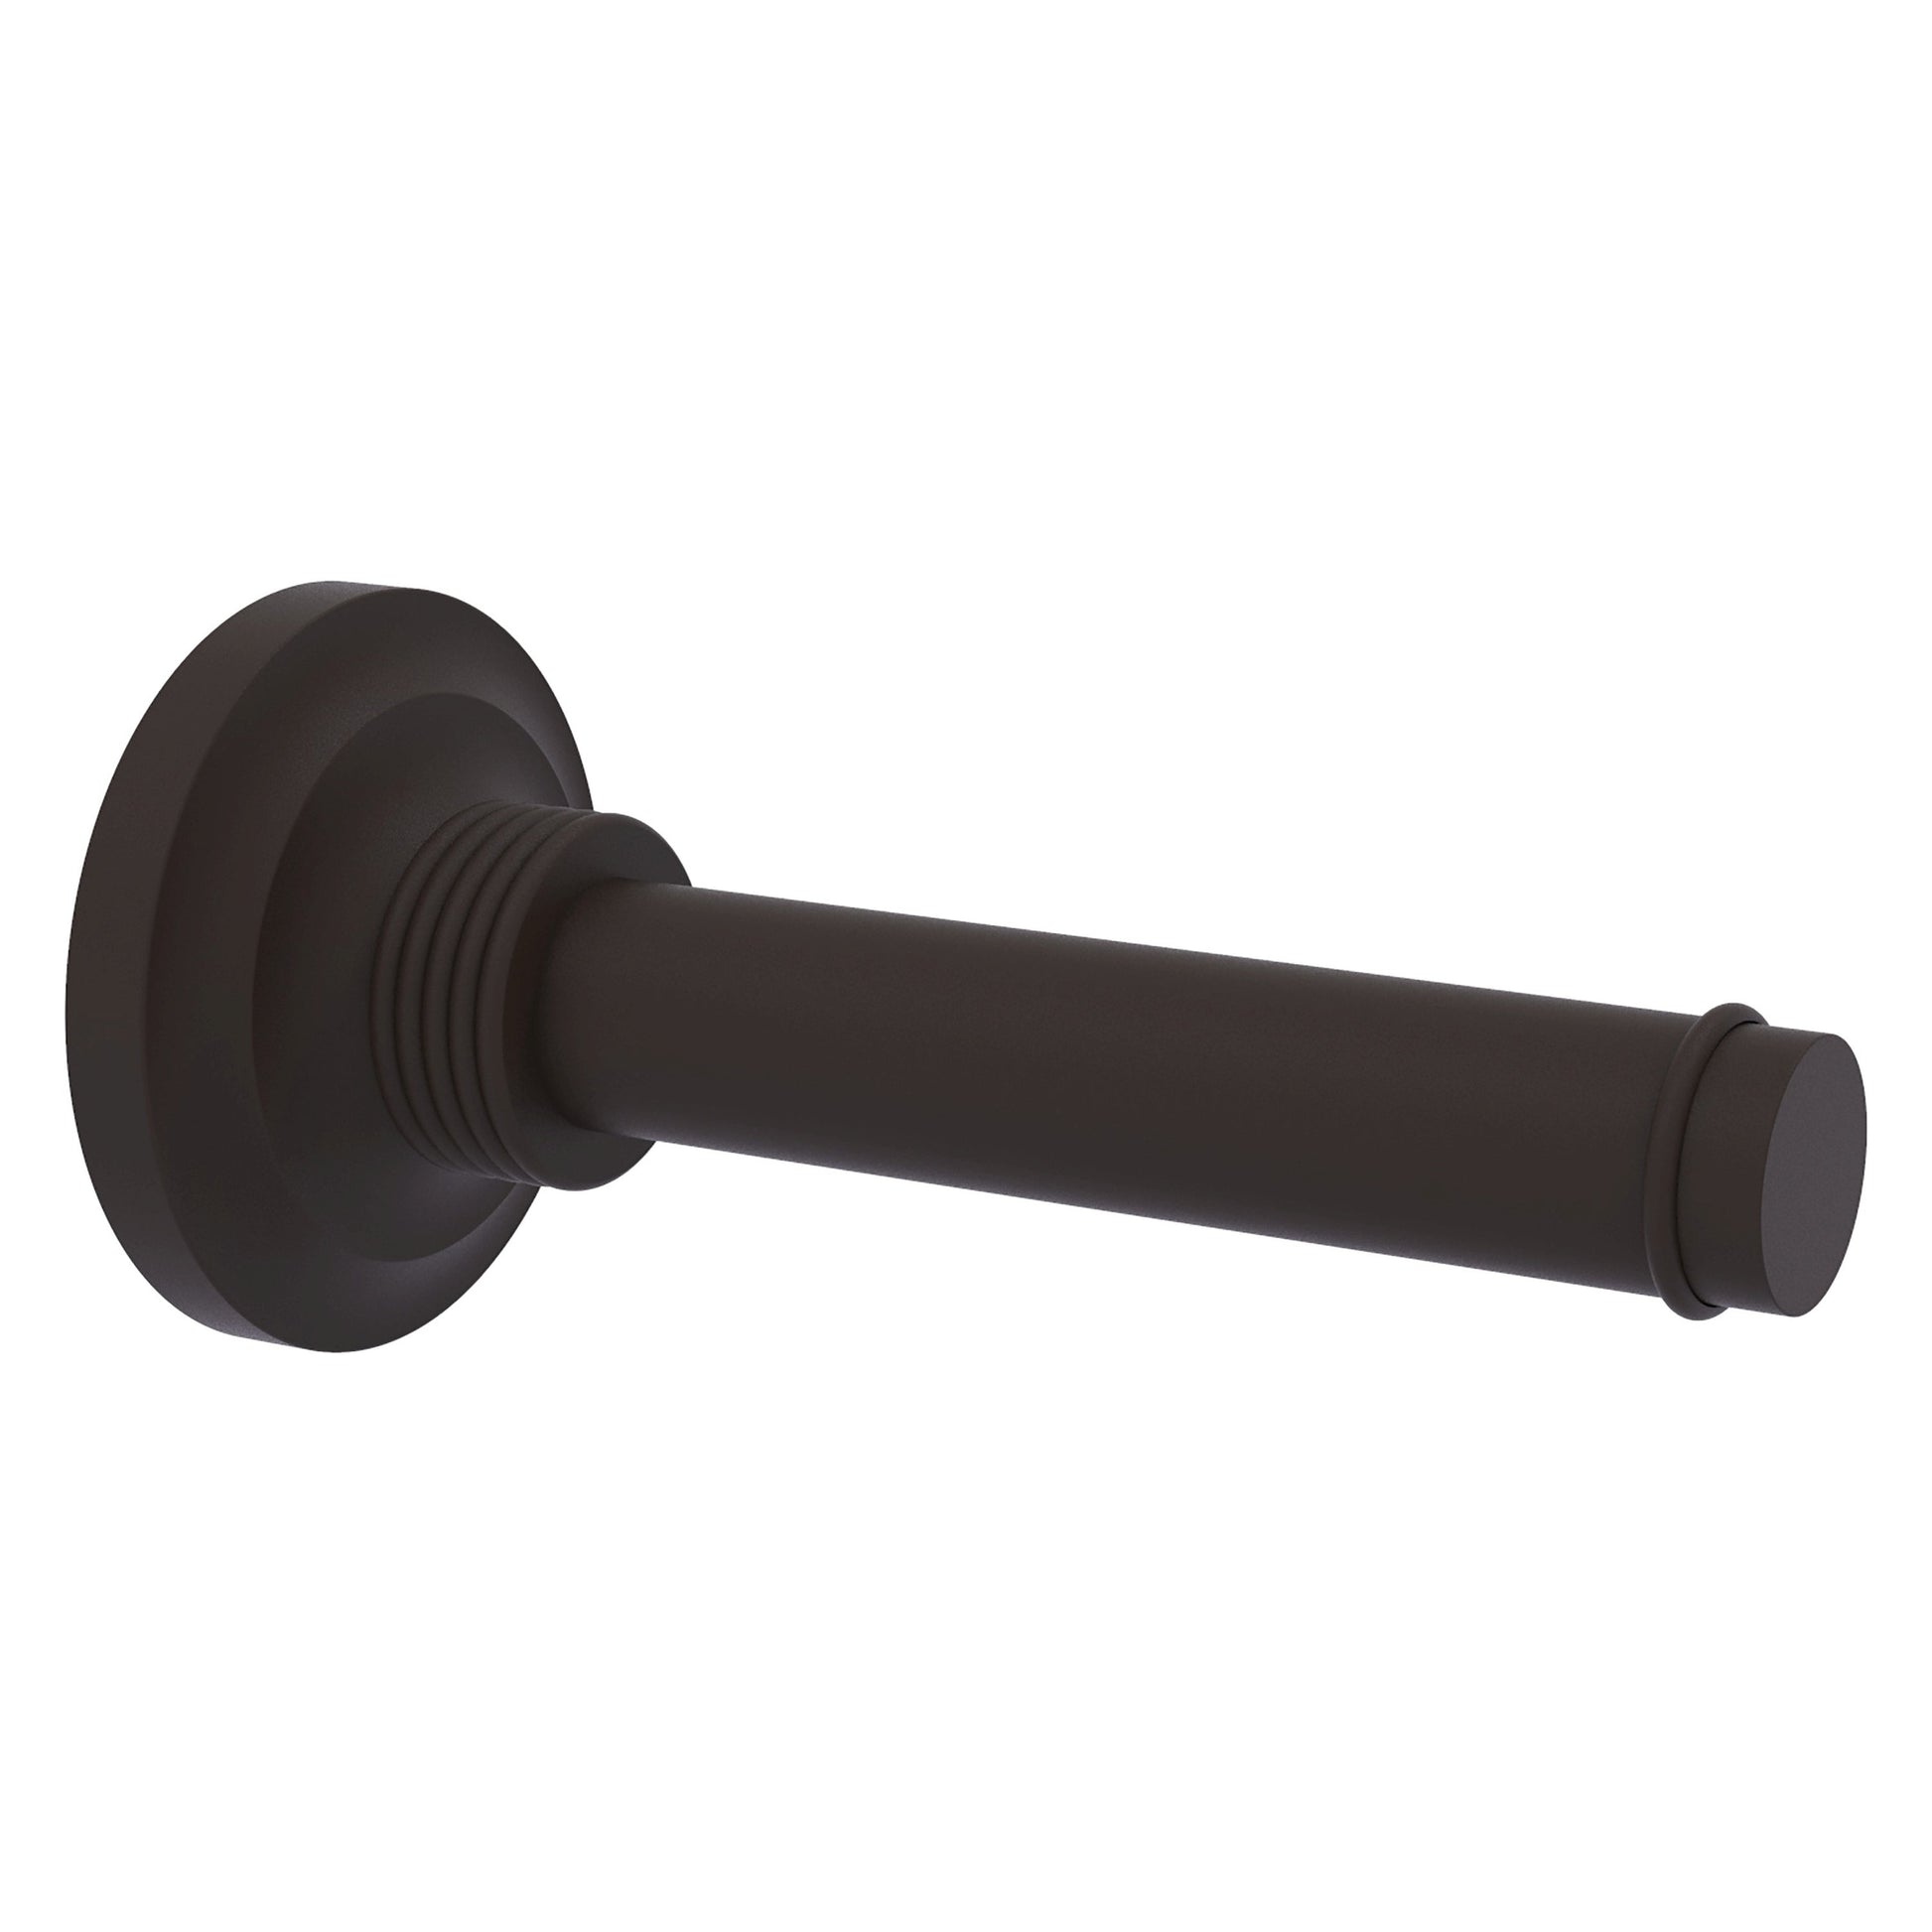 Allied Brass Que New 6.4" x 3" Oil Rubbed Bronze Solid Brass Horizontal Reserve Roll Toilet Paper Holder